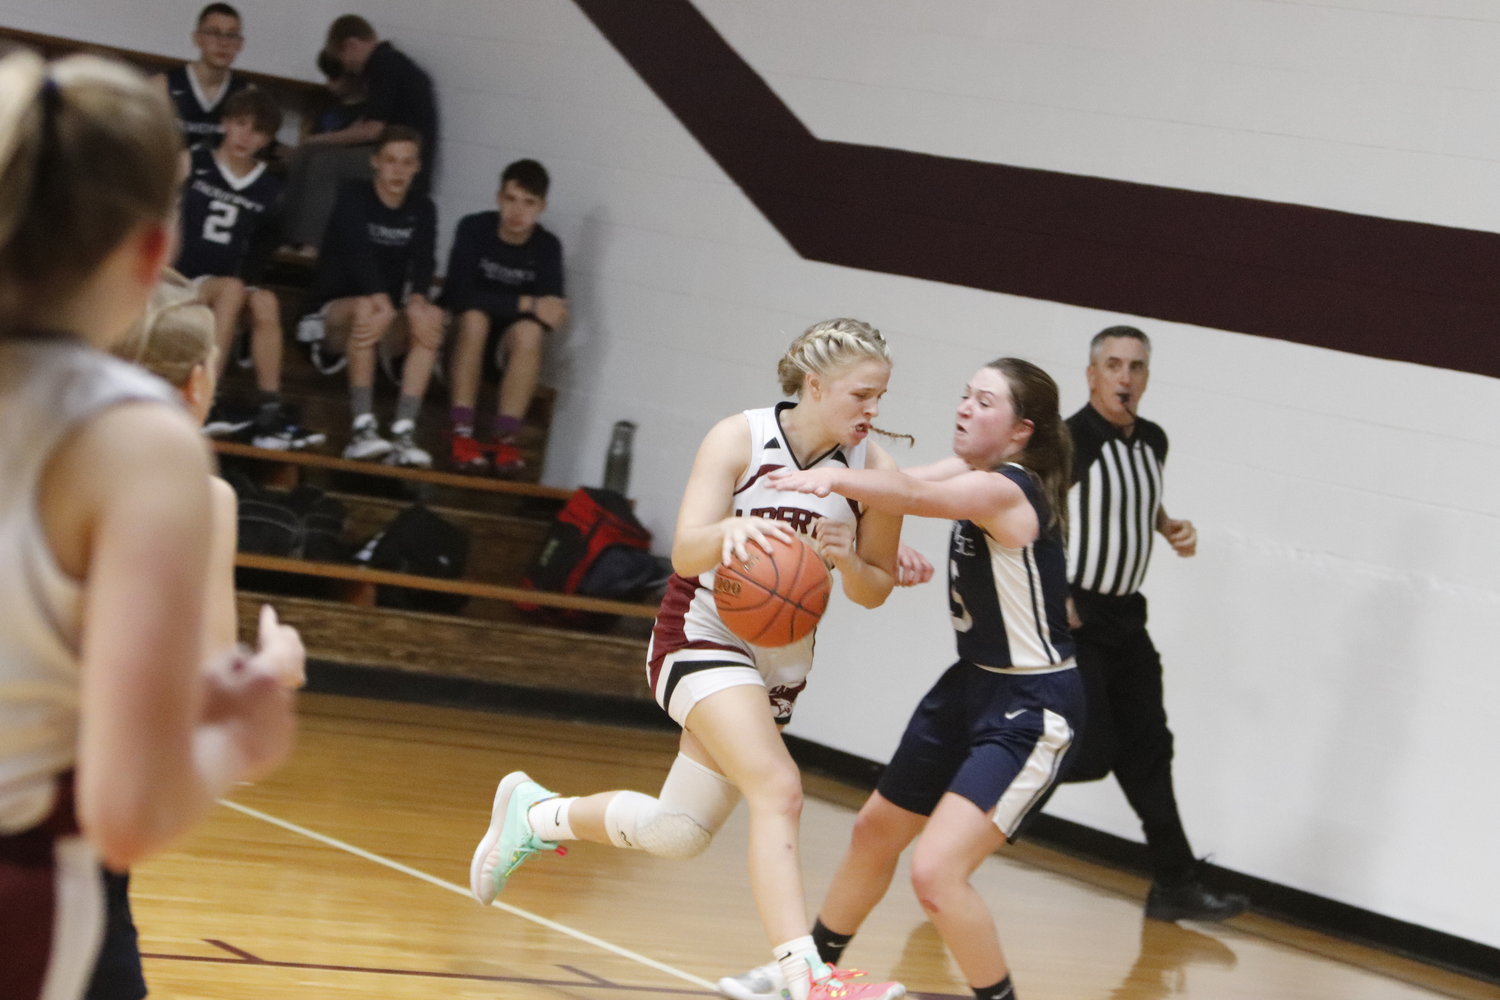 Liberty Christian senior Alli Meyer drives to the basket during last week’s season opener against Providence Classical Christian Academy. Meyer scored 16 points in the win.